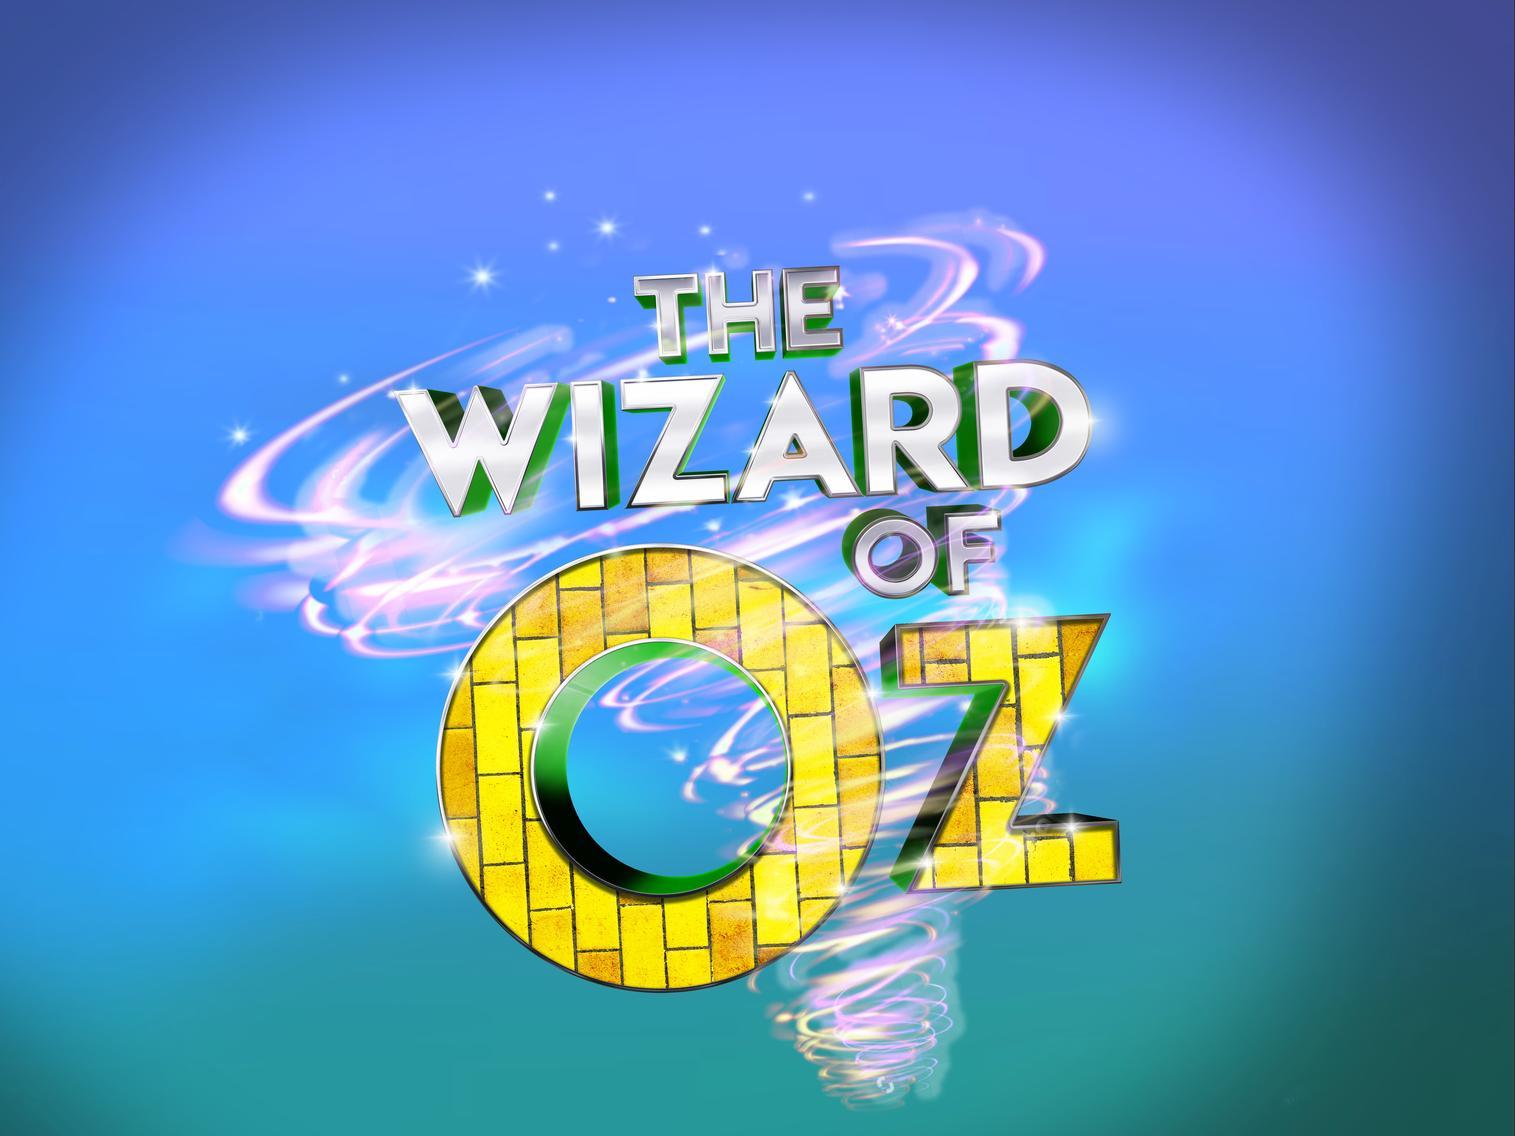 Take a trip to the land of Oz in Leeds Playhouses Quarry Theatre, which has reopened following the buildings multi-million pound redevelopment. The show runs until Saturday, January 25.